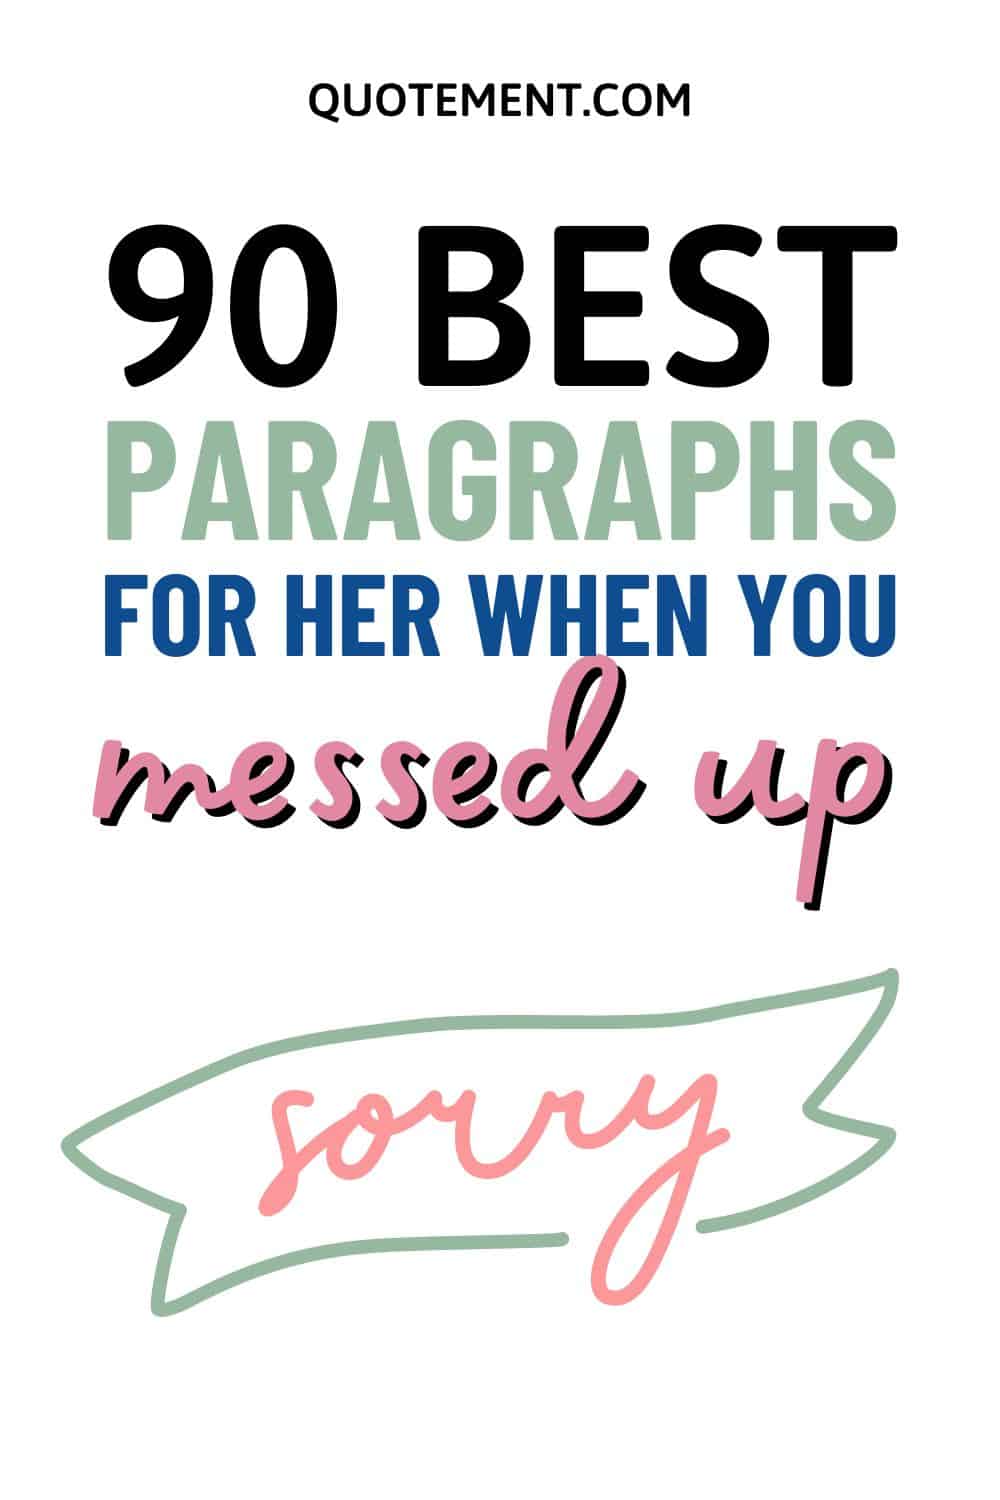 90 Best I’m Sorry Paragraphs For Her When You Messed Up